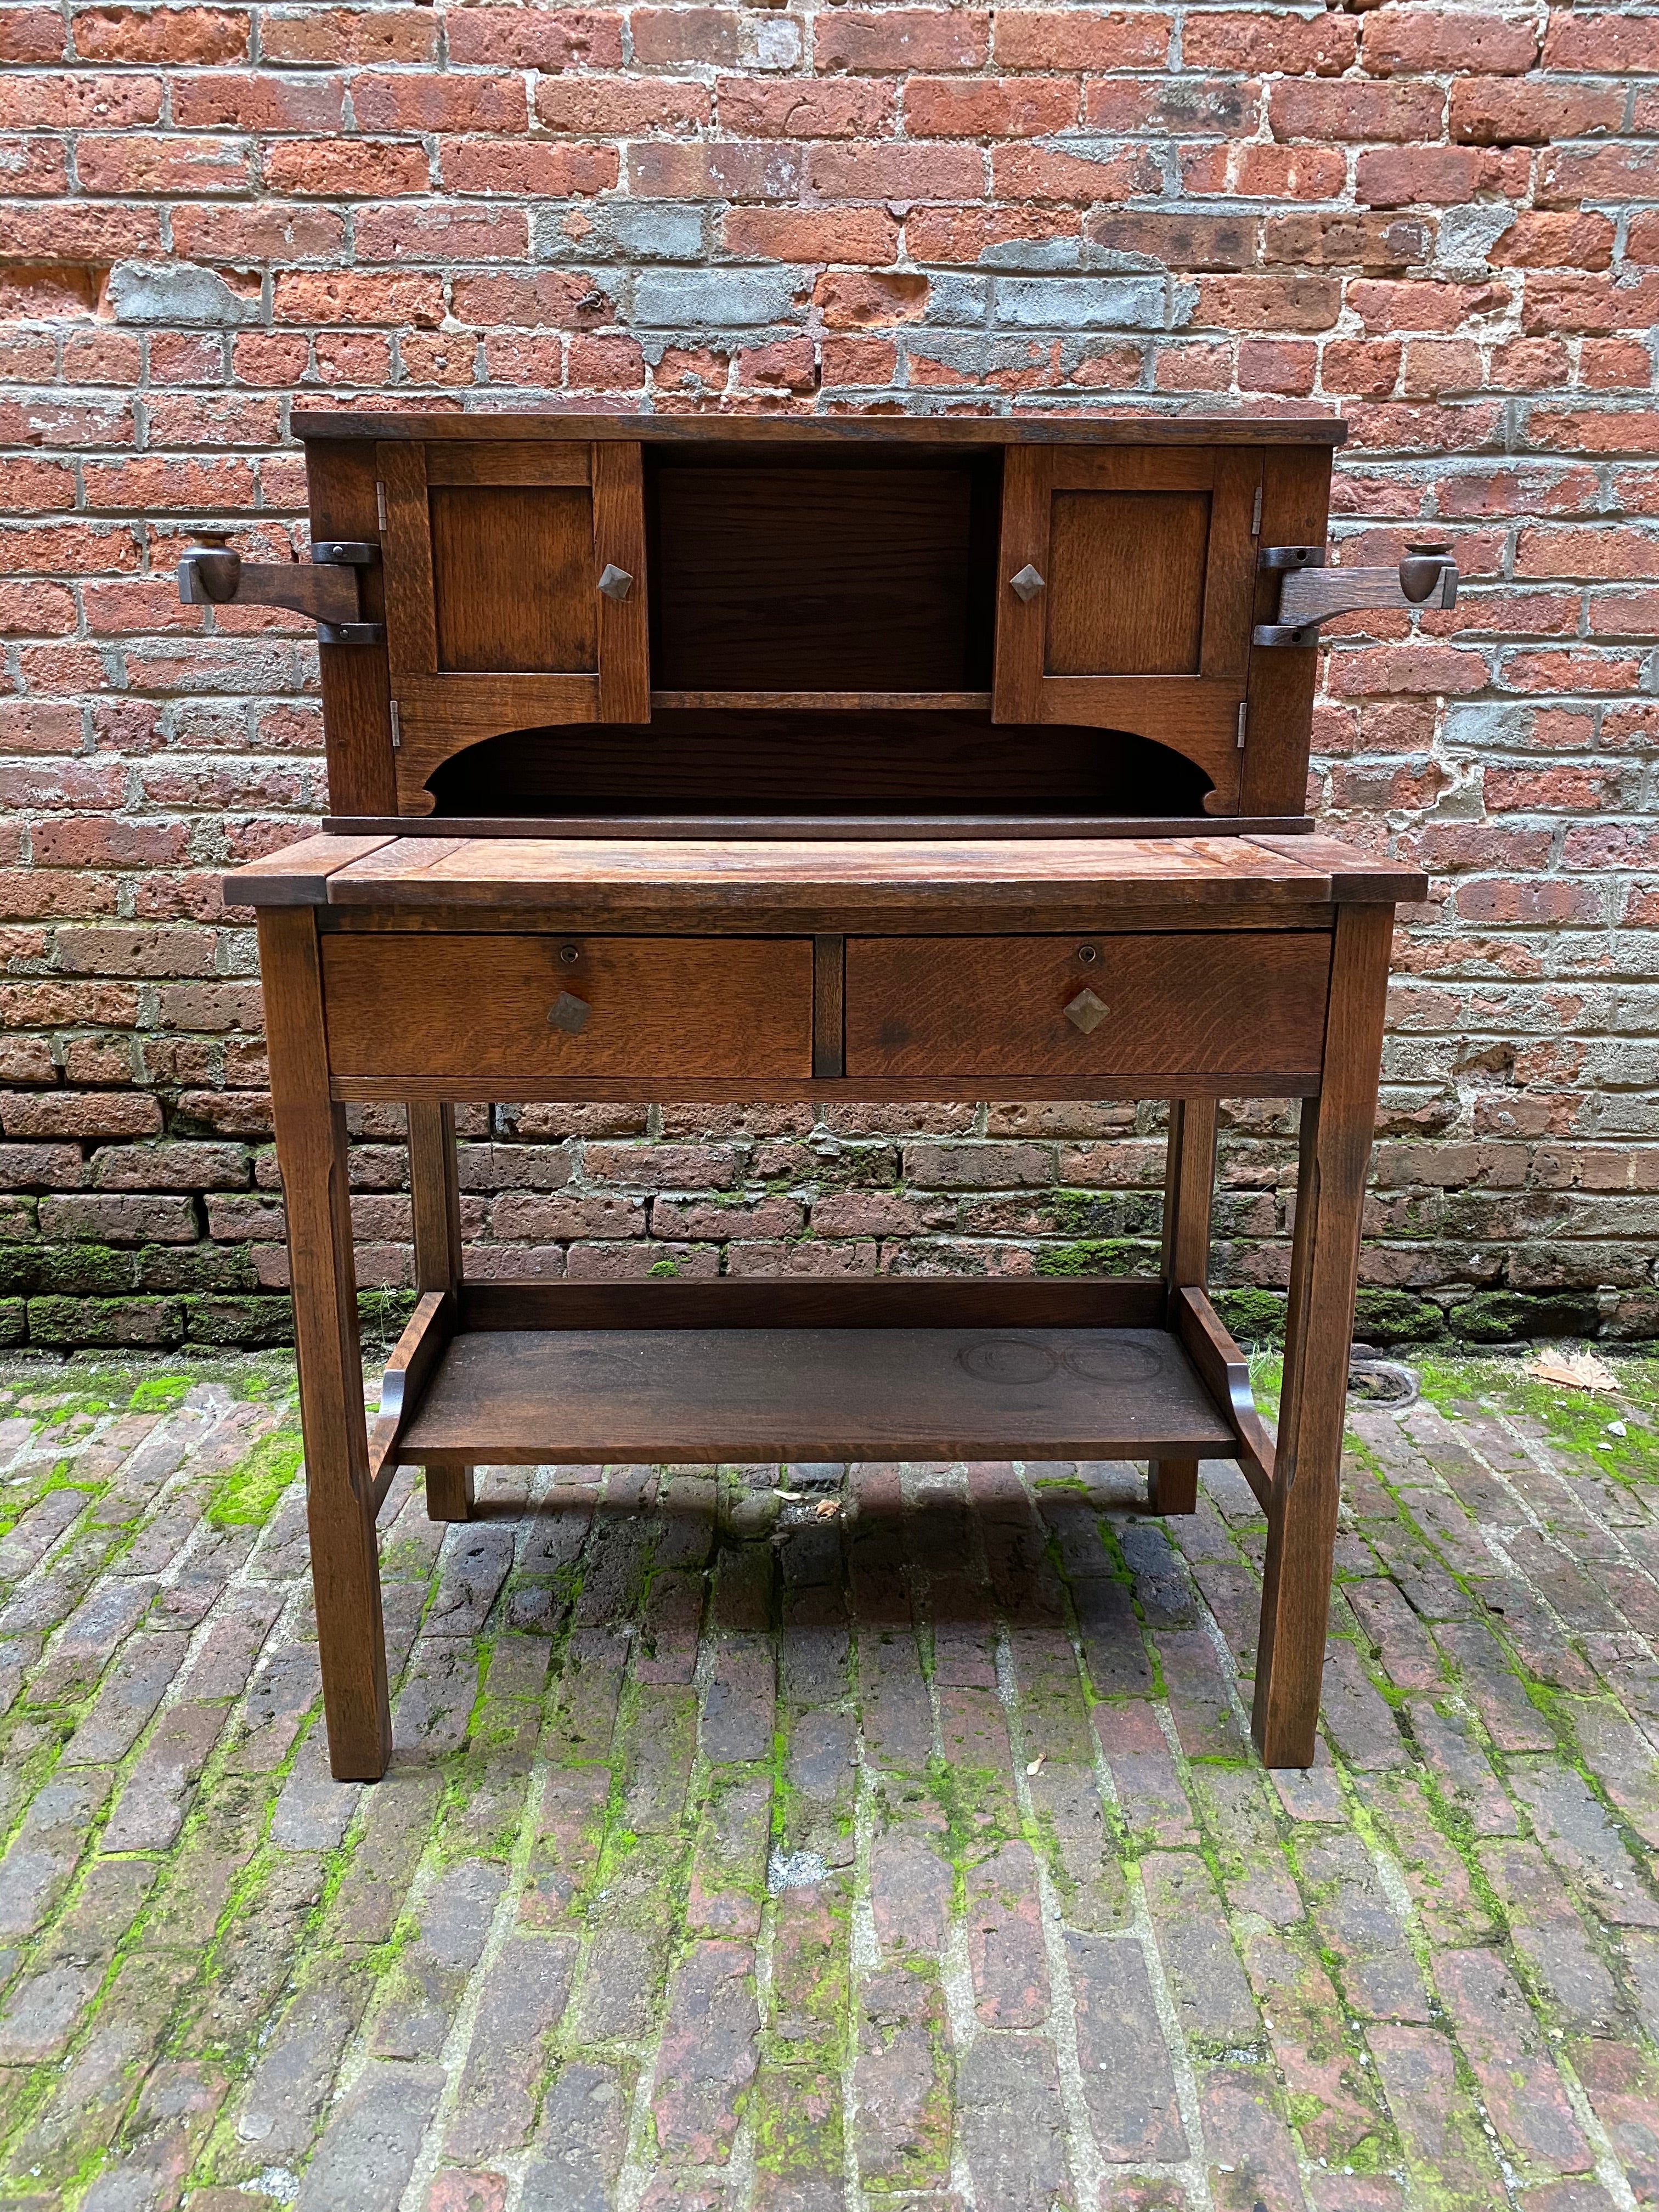 American oak Arts & Crafts writing desk. Featuring solid oak constuction, sliding work space, cubby holes, solid brass knobs, two drawers and articulated candleholder arms. Circa 1900-1910.

Structurally sound and sturdy construction. Marks on